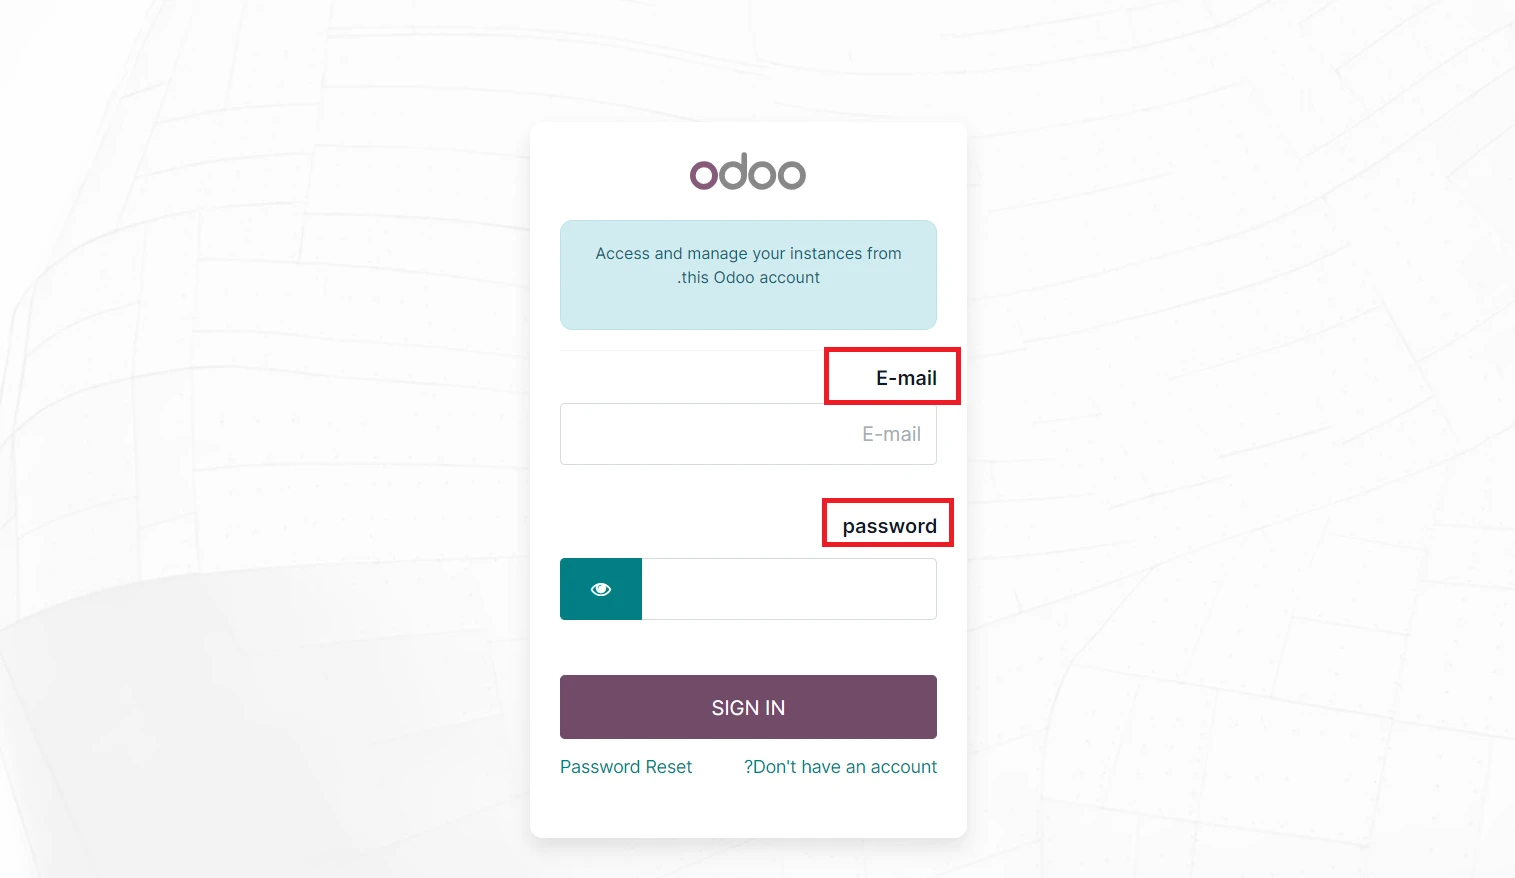 Odoo log in page